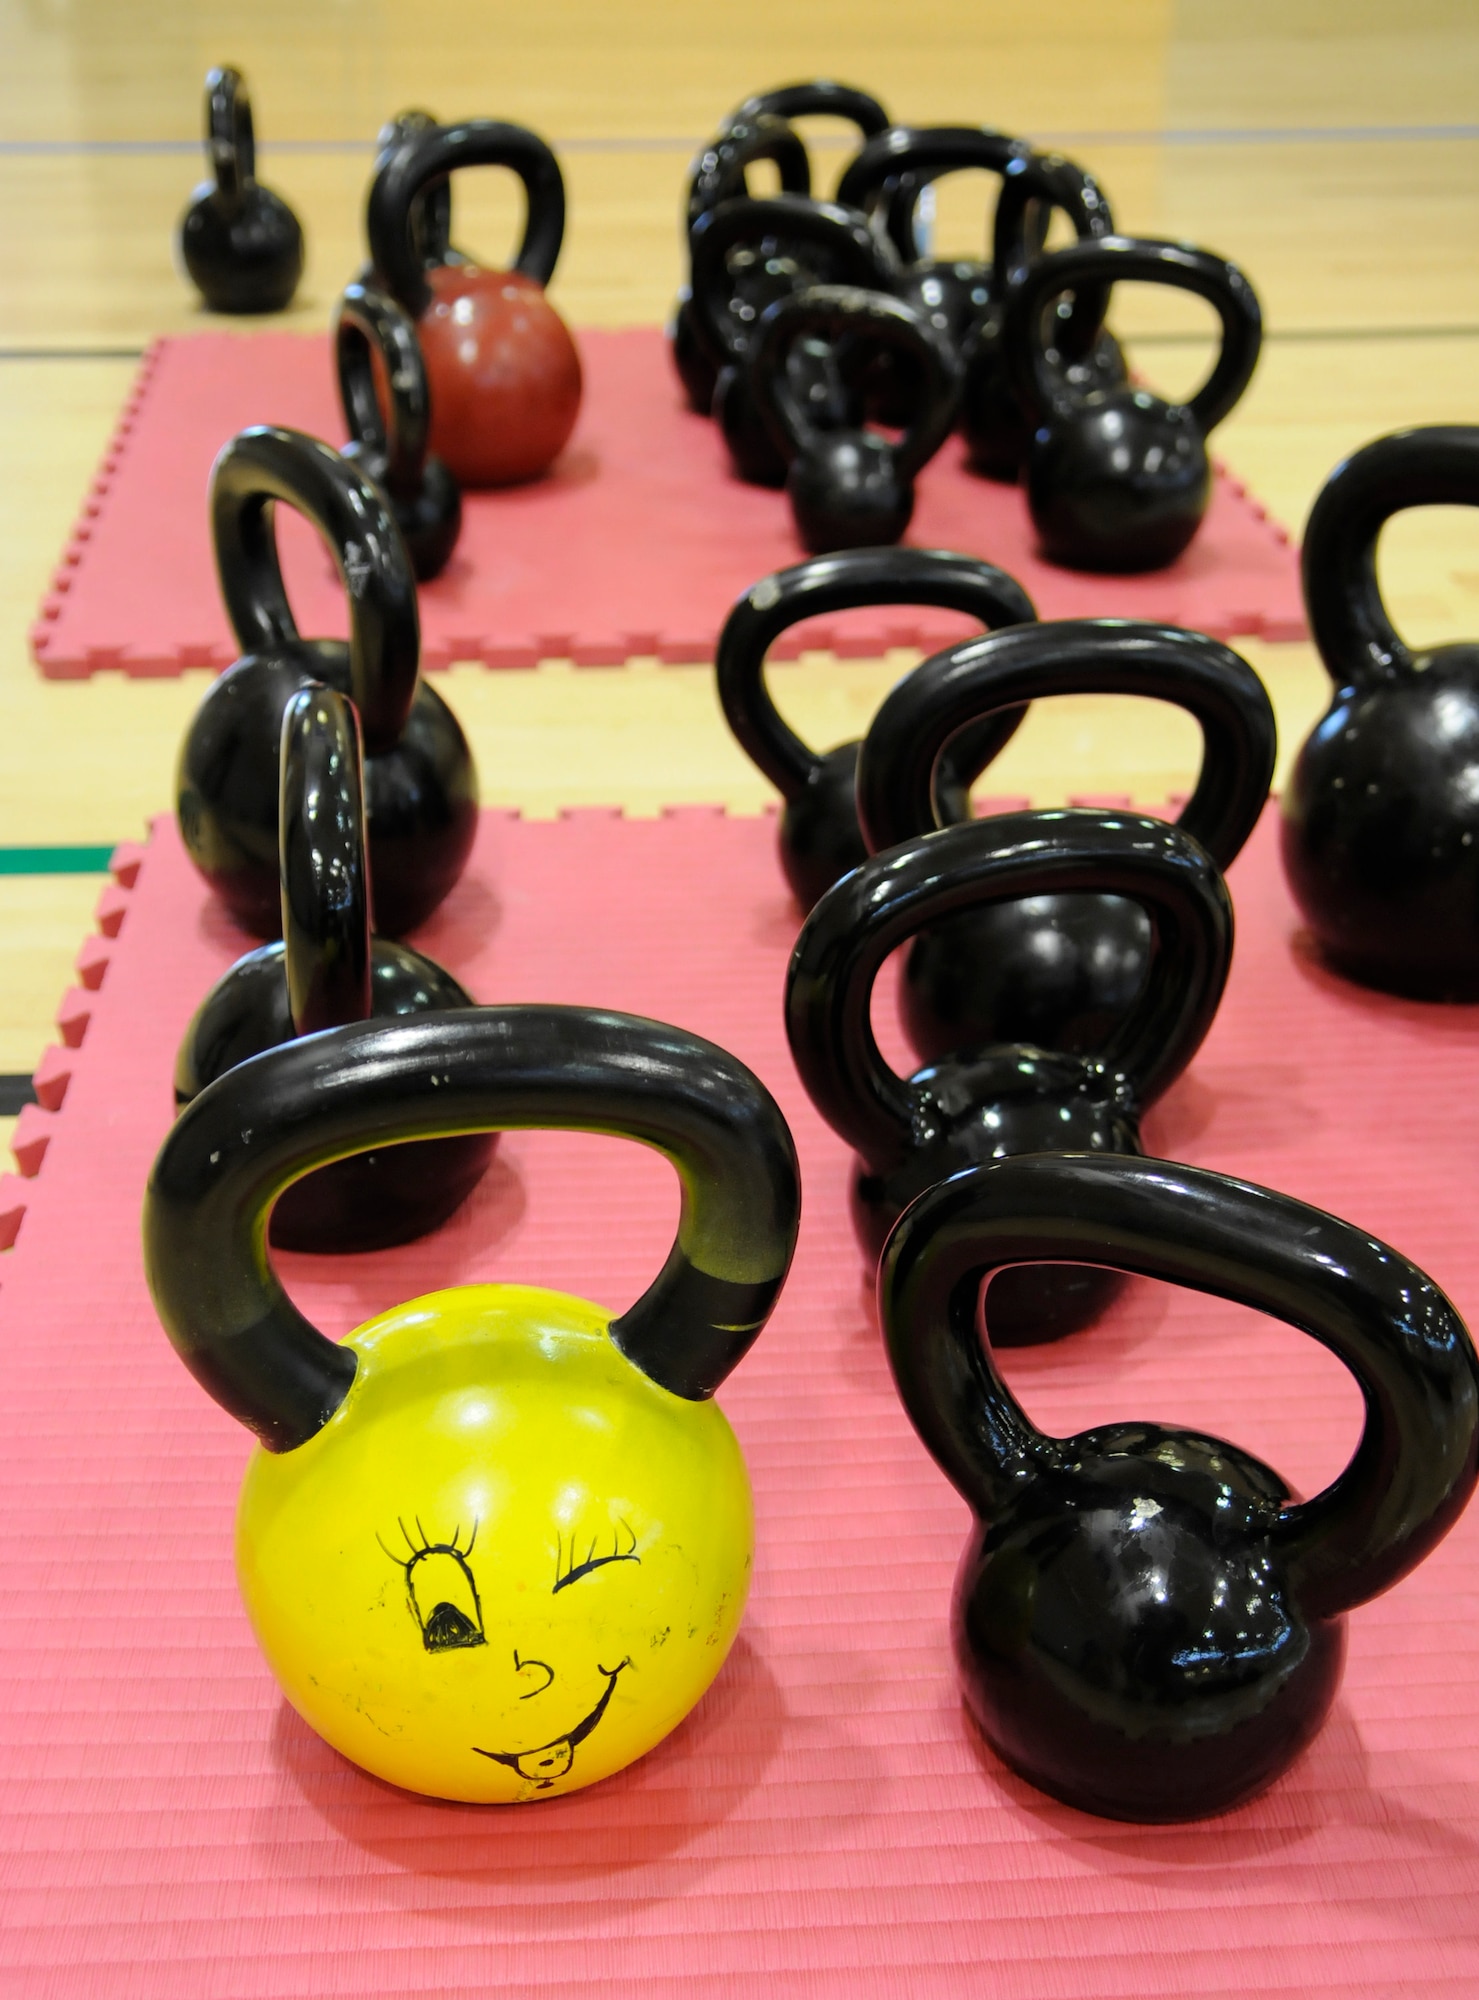 RAF MILDENHALL, England – Kettle bells of various sizes, weights and colors are ready to be used at one of many stations during the circuit class at the Hardstand Fitness Center Feb. 24.  The class offers a full range of exercises that targets the whole body for beginners and up.  (U.S. Air Force photo/Staff Sgt. Christopher L. Ingersoll)